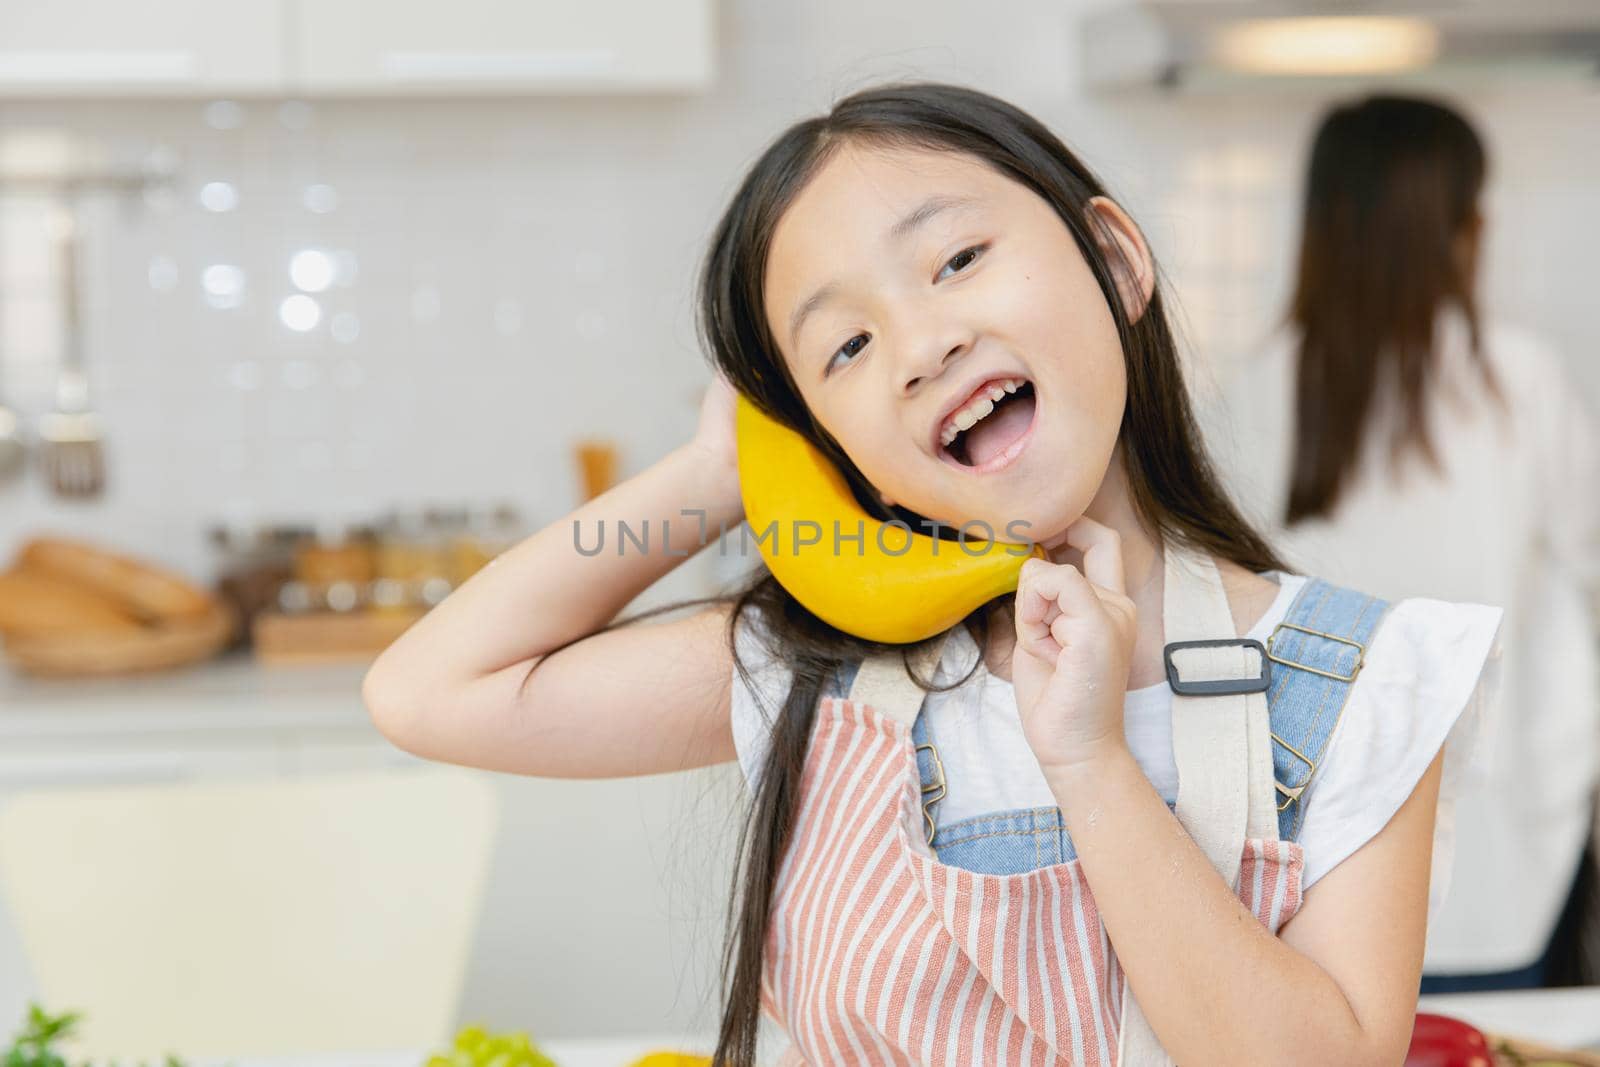 Cute girl child enjoy funny candid moment playing with banana at home kitchen.